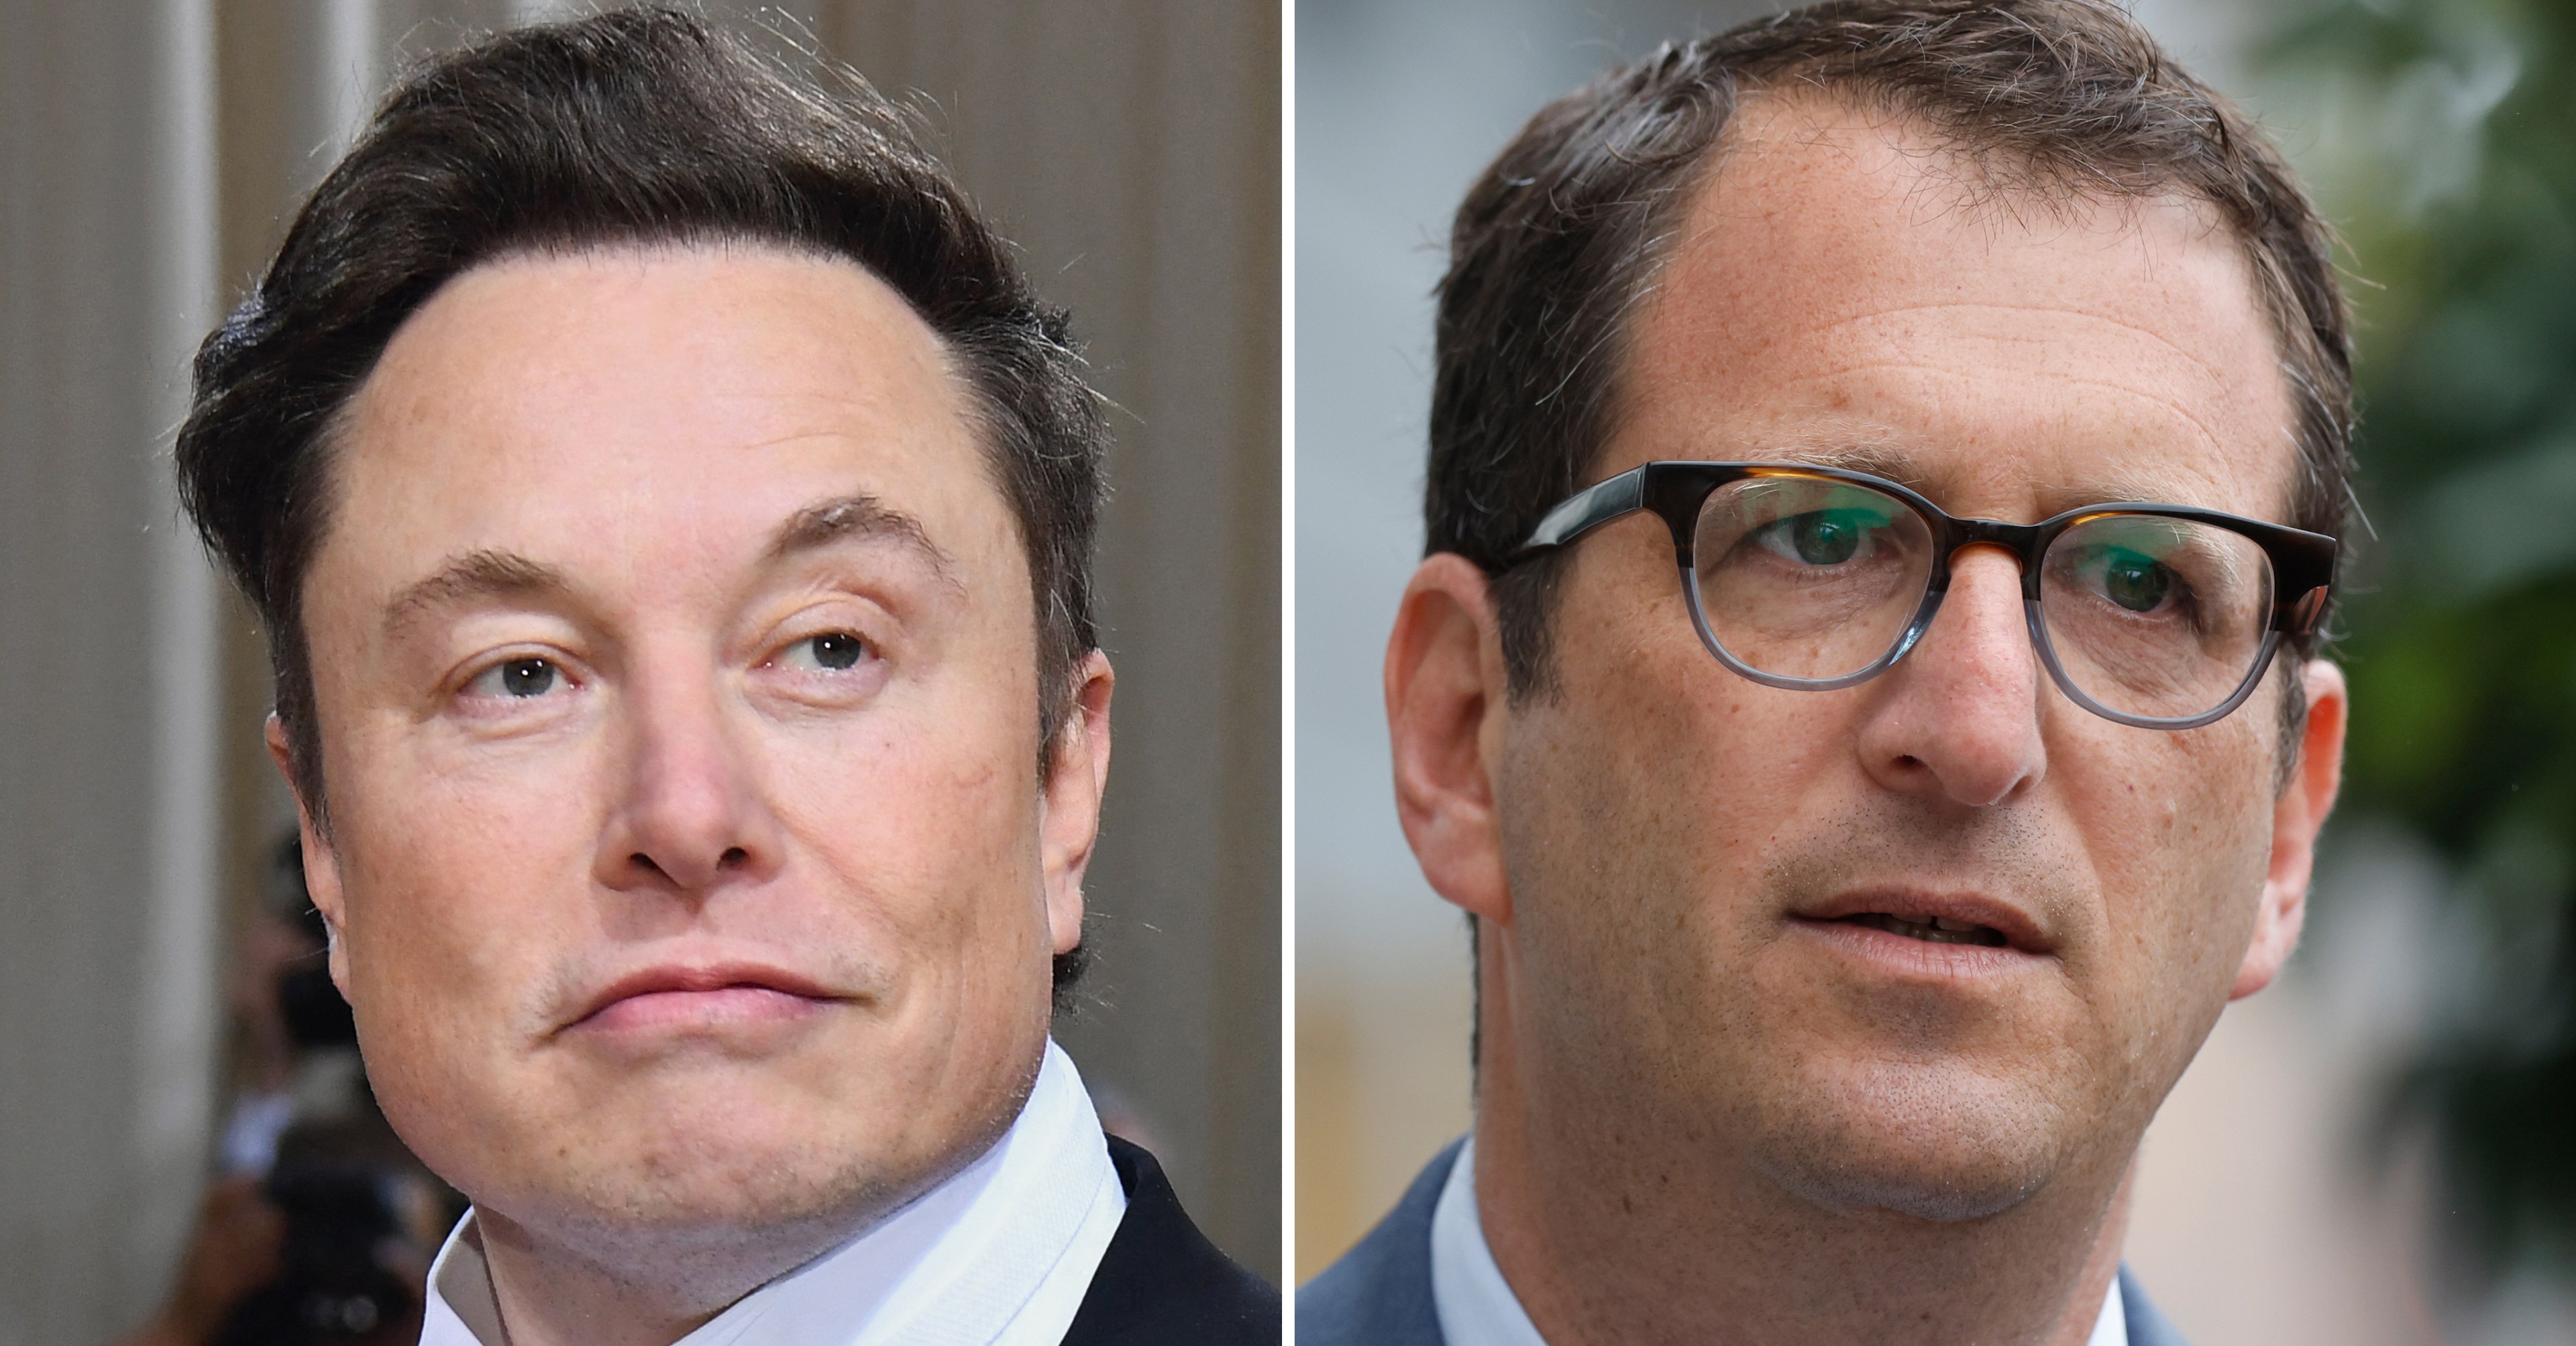 A split image of two men, one on the left with a faint smile and suit, and one on the right with glasses and a serious look.